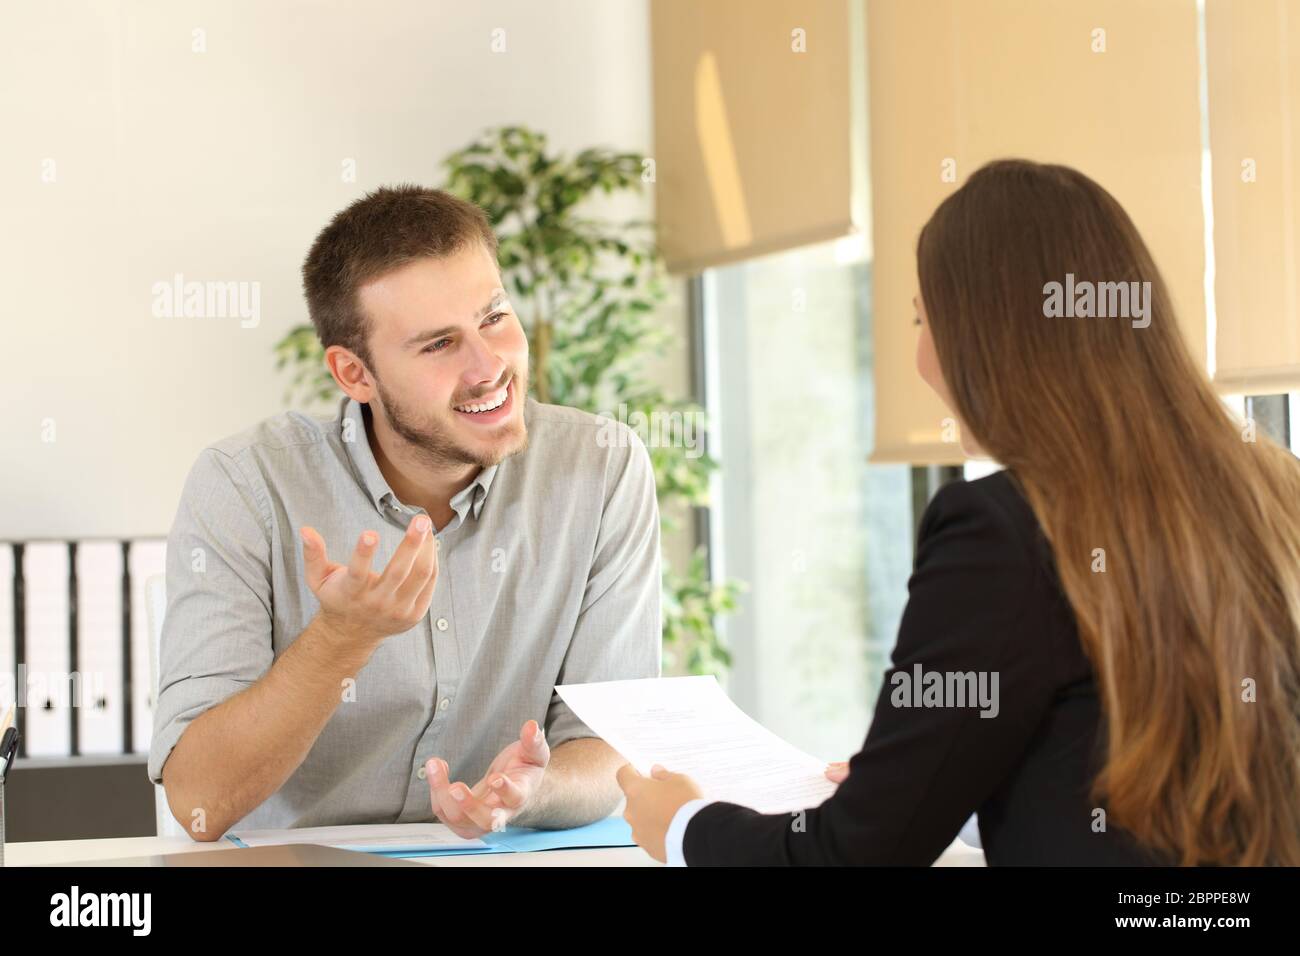 Confident man talking to his interviewer during a job interview Stock Photo